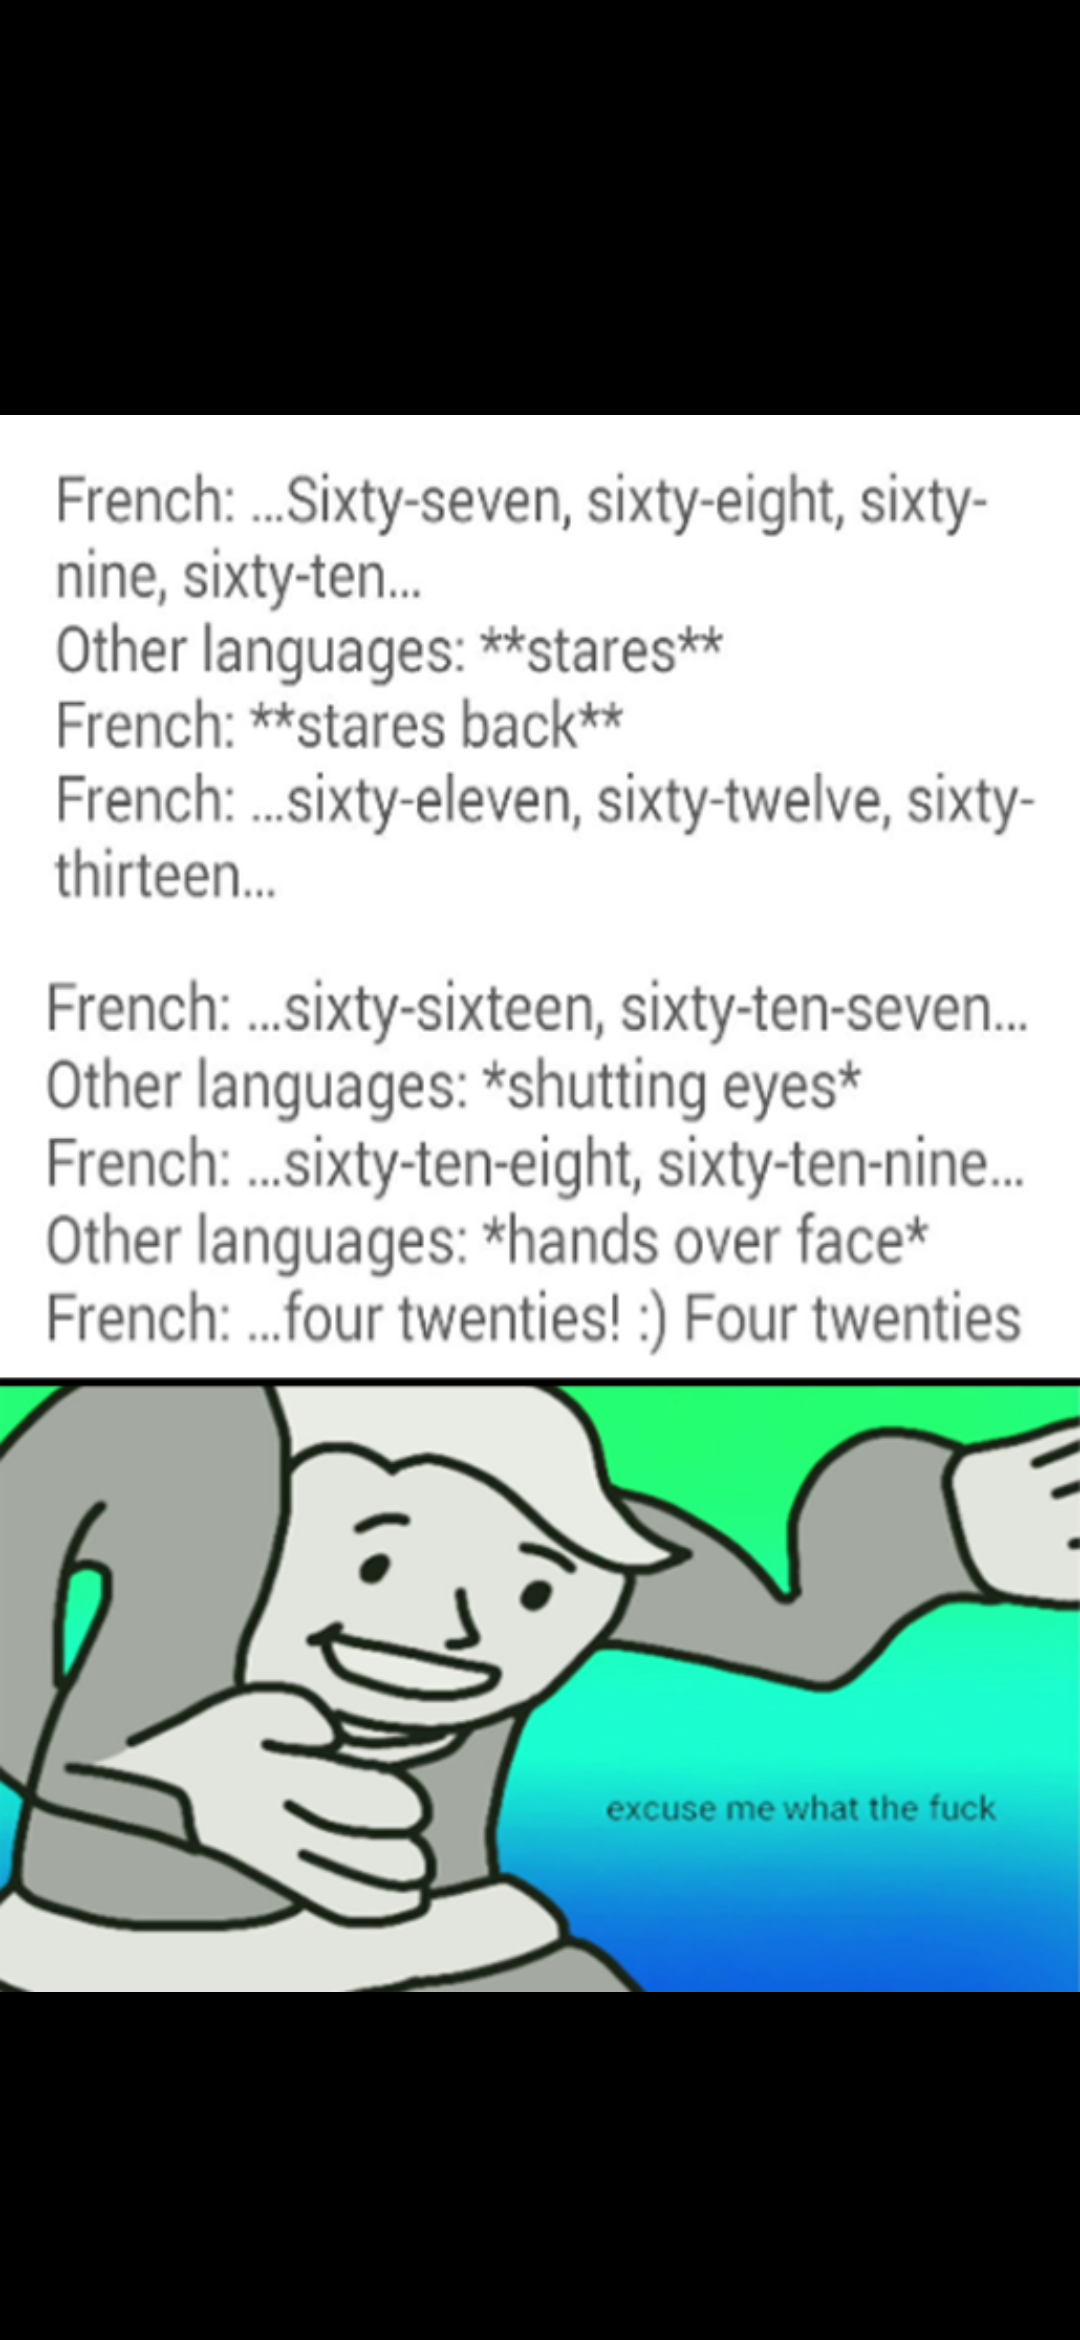 Frenchtards